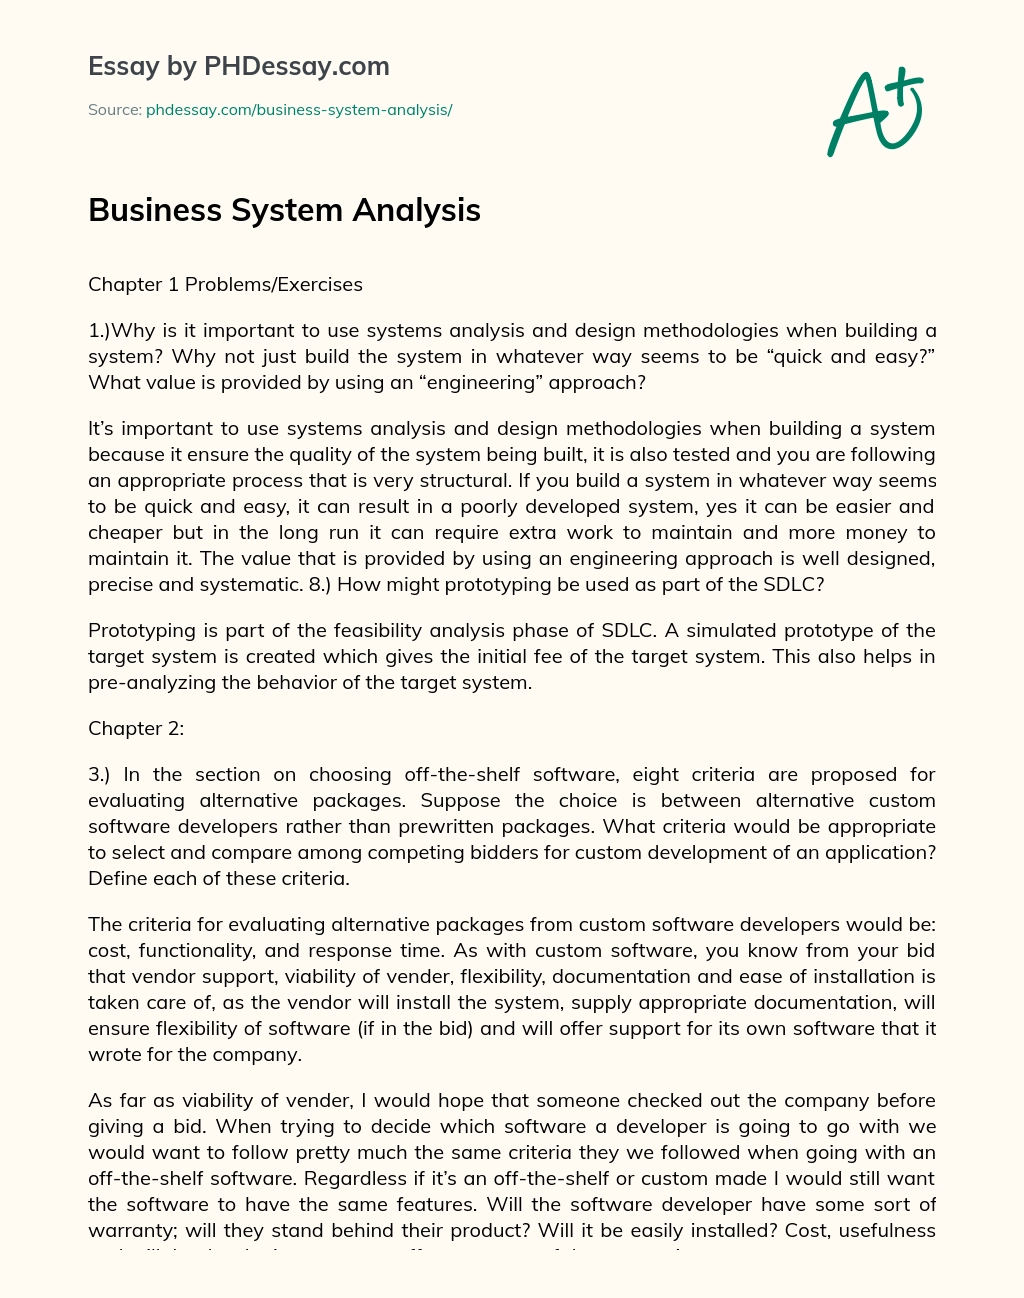 Business System Analysis essay